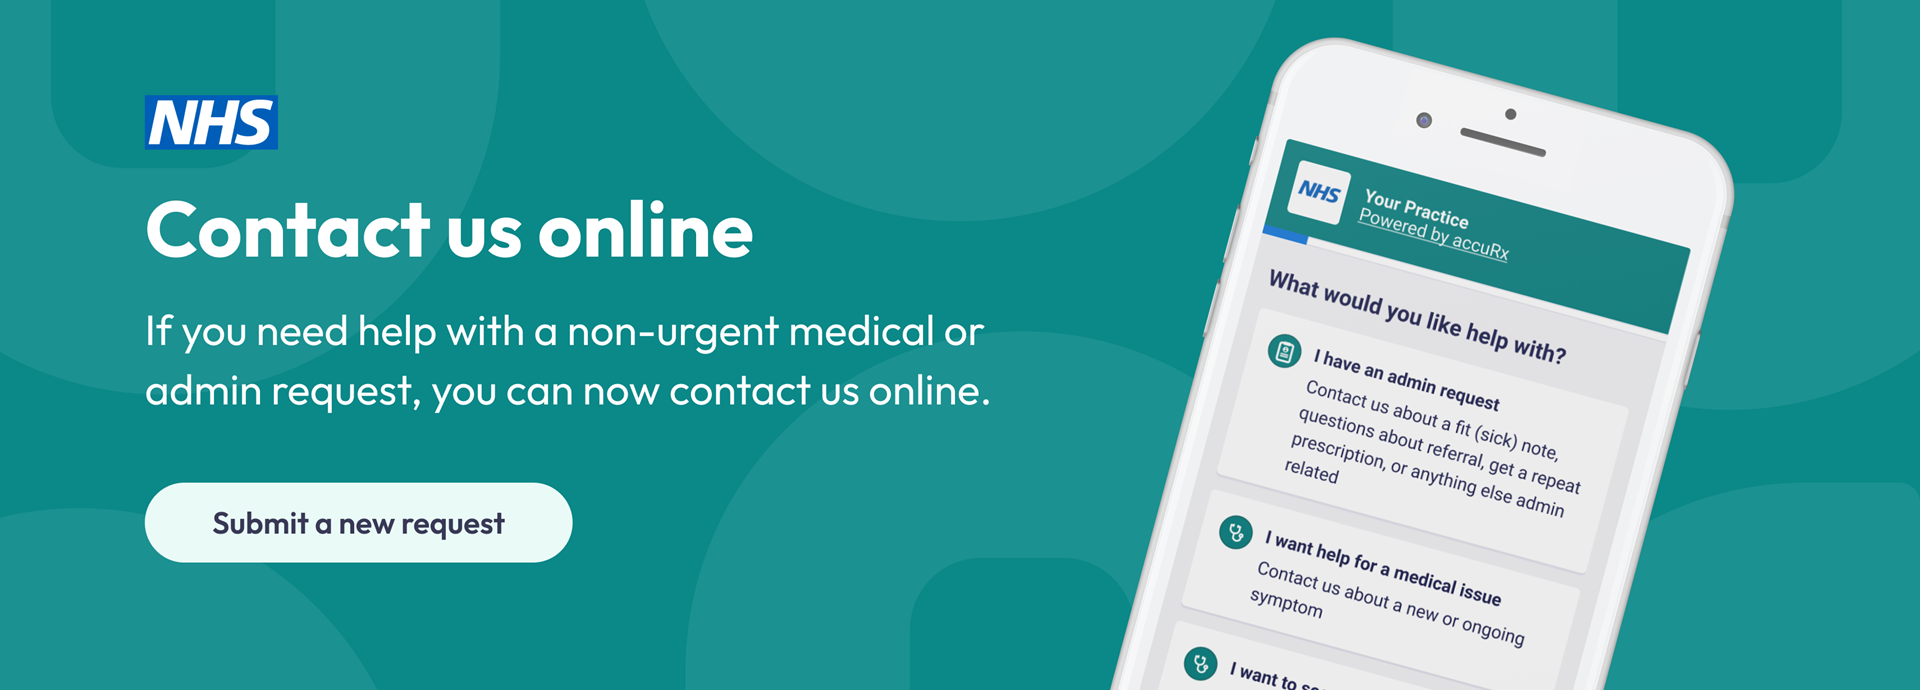 Contact us online, If you need help with a non-urgent medical or admin request, you can now contact us online.